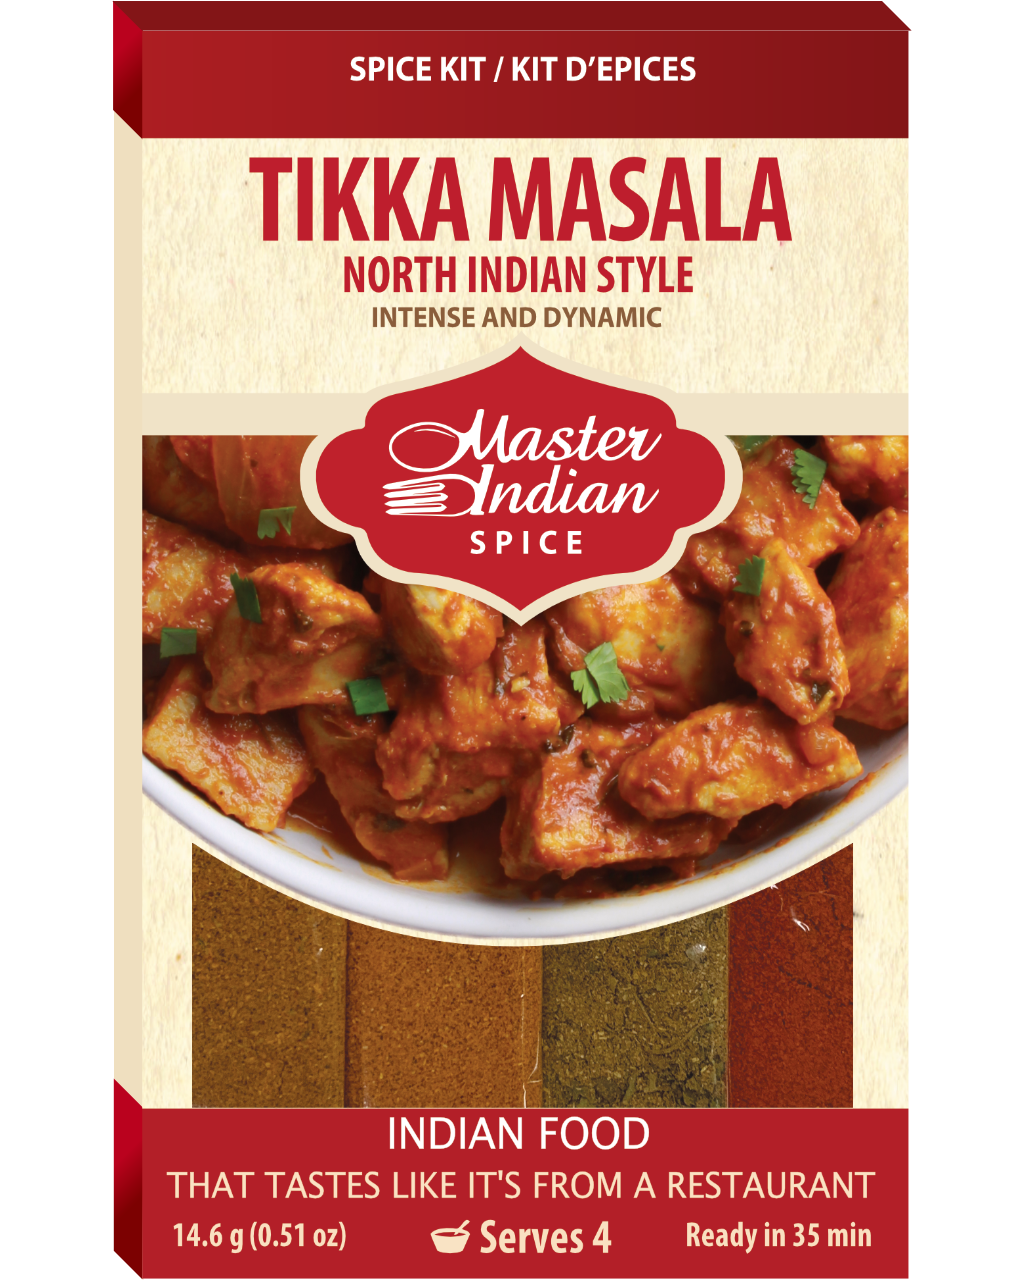 MasterIndian: Authentic Indian meals made simple. – Master Indian Spice